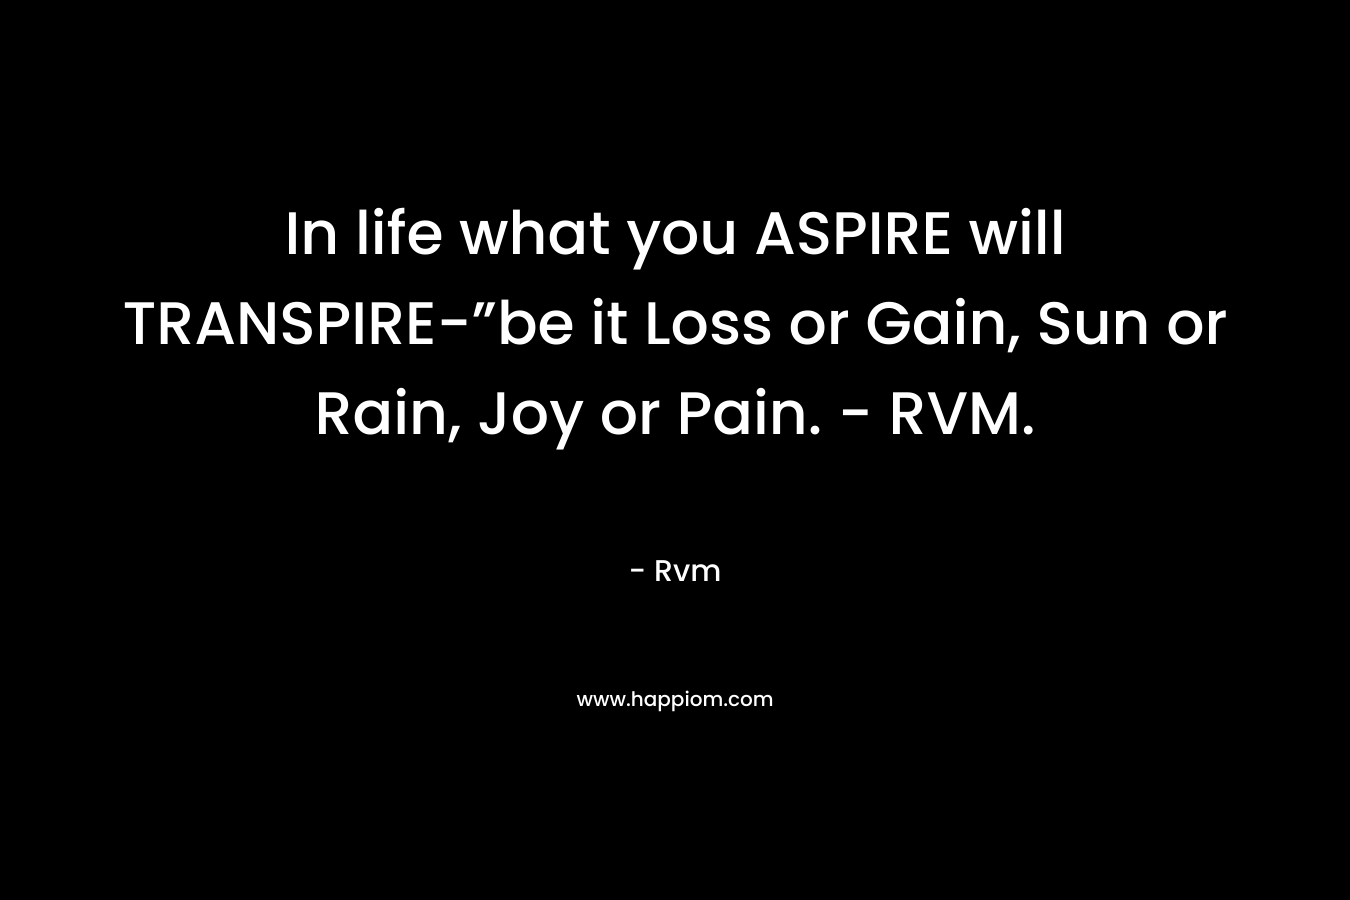 In life what you ASPIRE will TRANSPIRE-”be it Loss or Gain, Sun or Rain, Joy or Pain. - RVM.